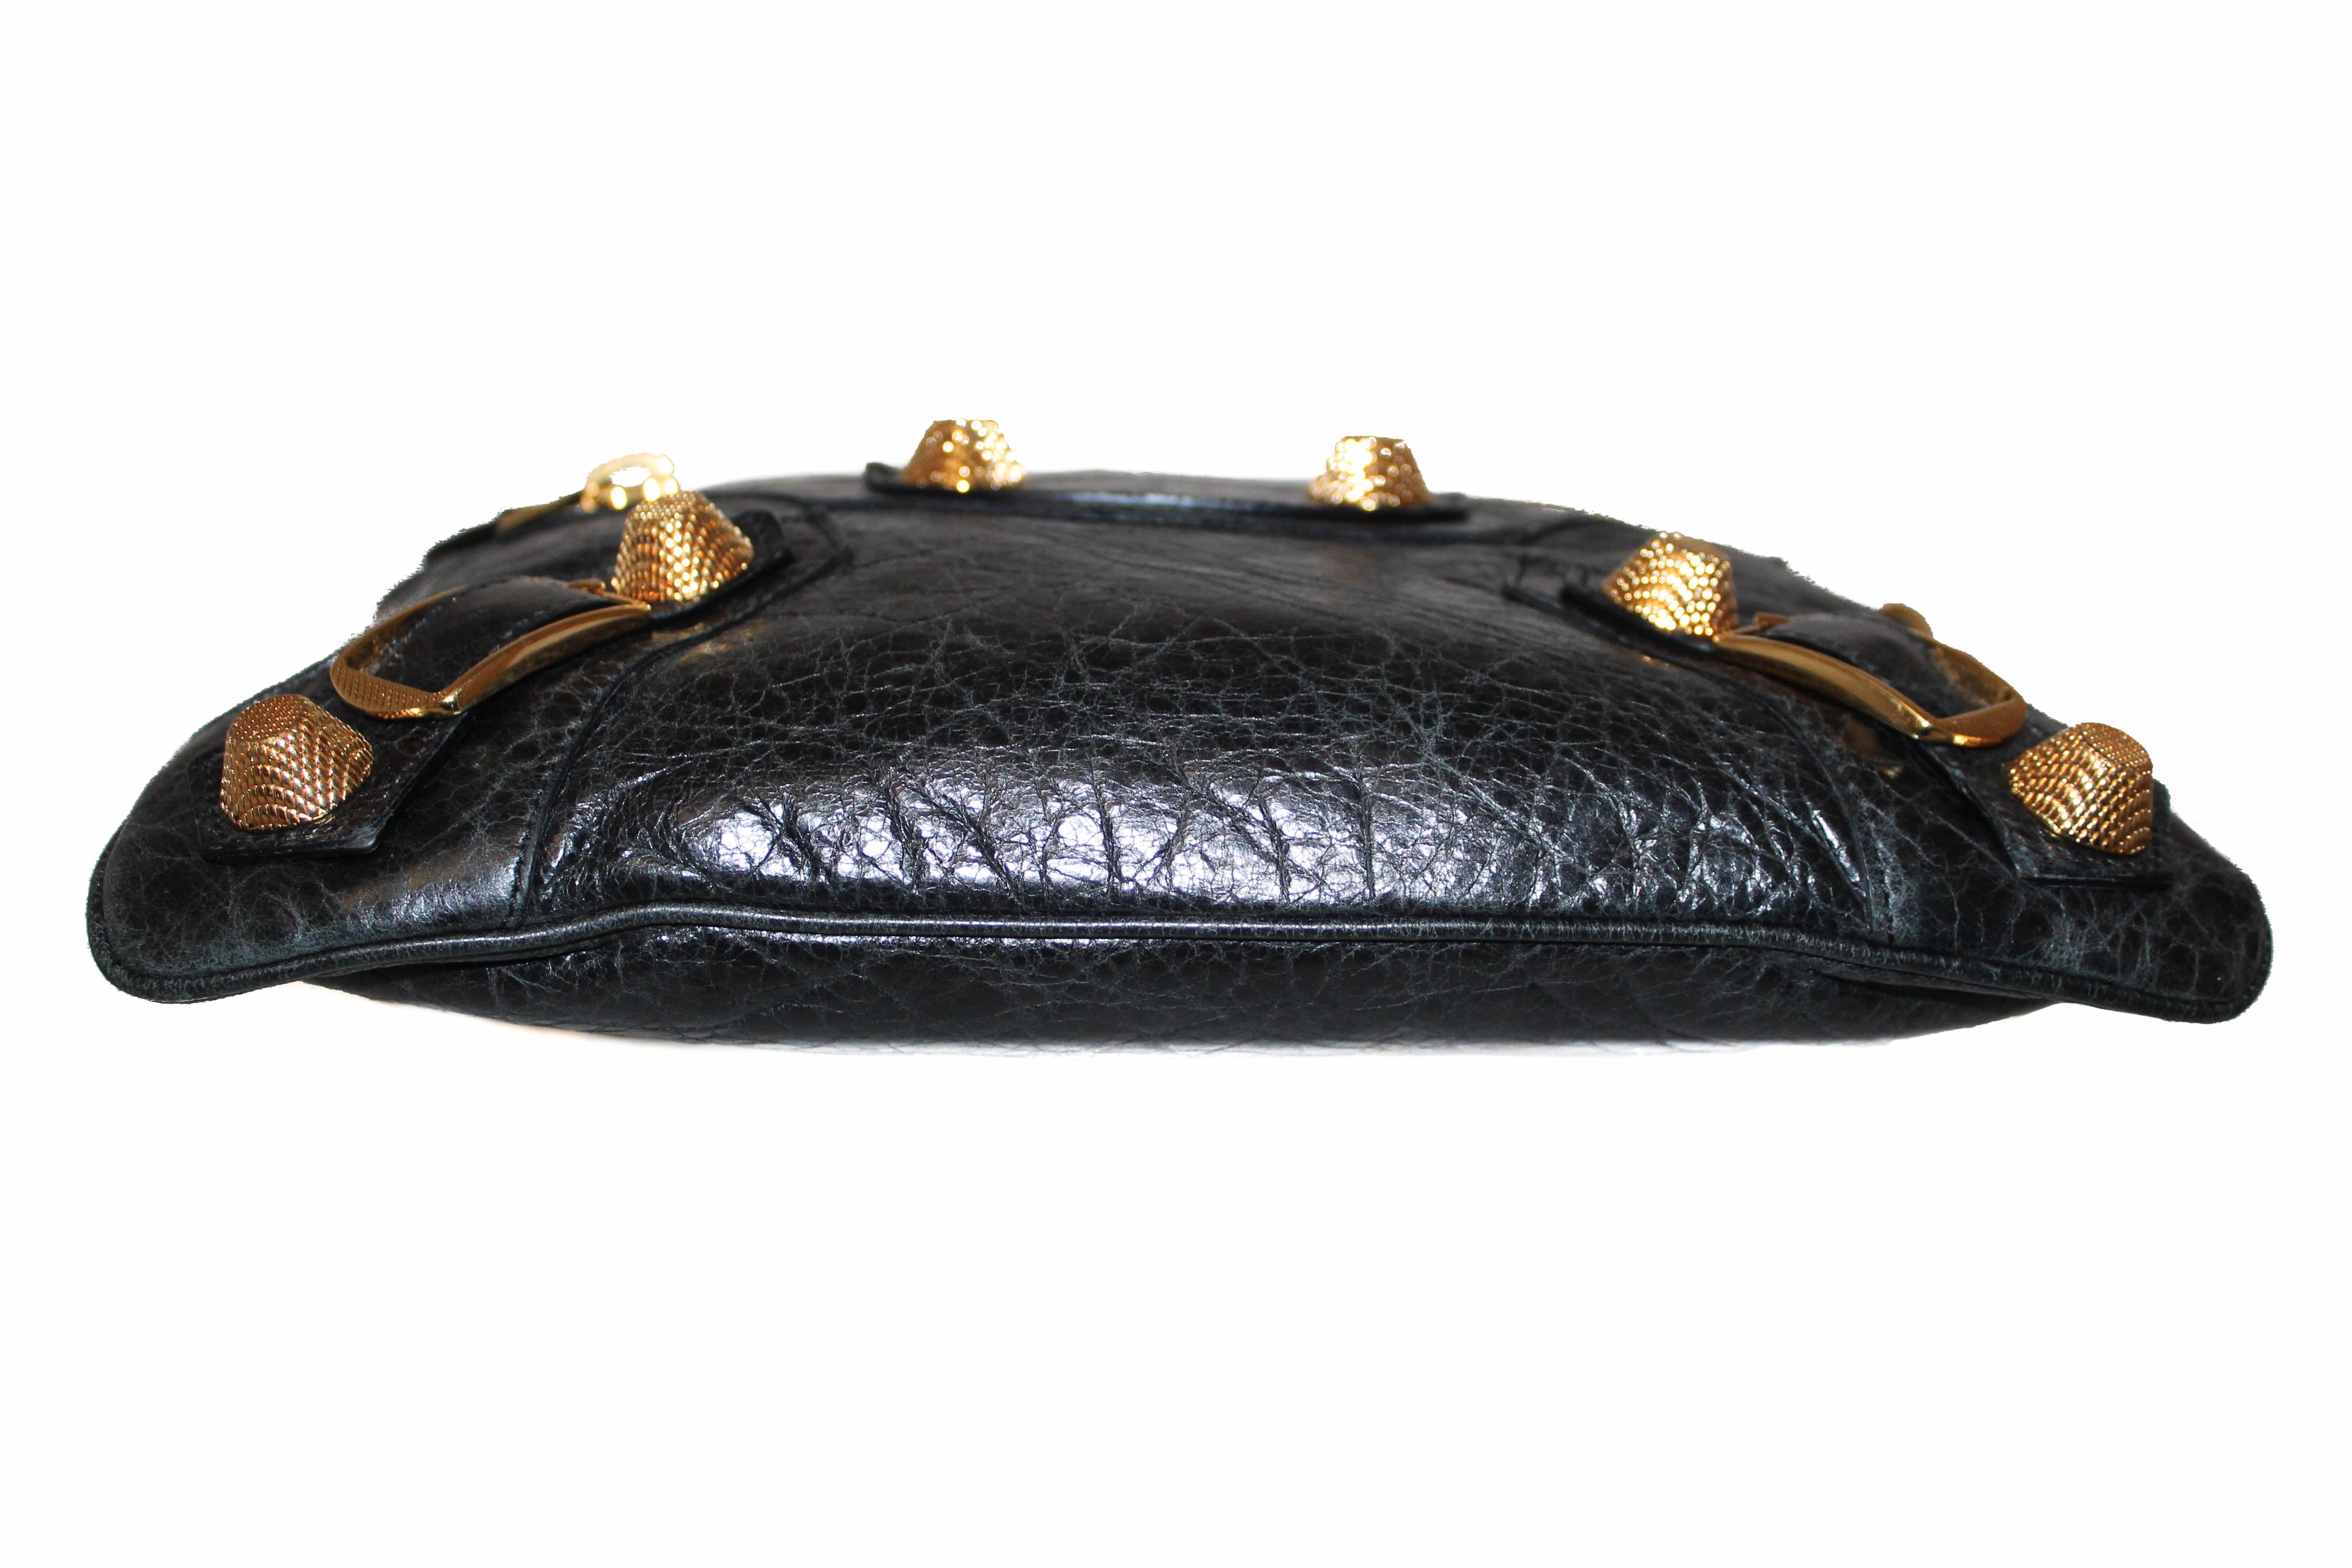 Authentic Balenciaga Black Giant 21 Gold Lambskin Leather Clutch